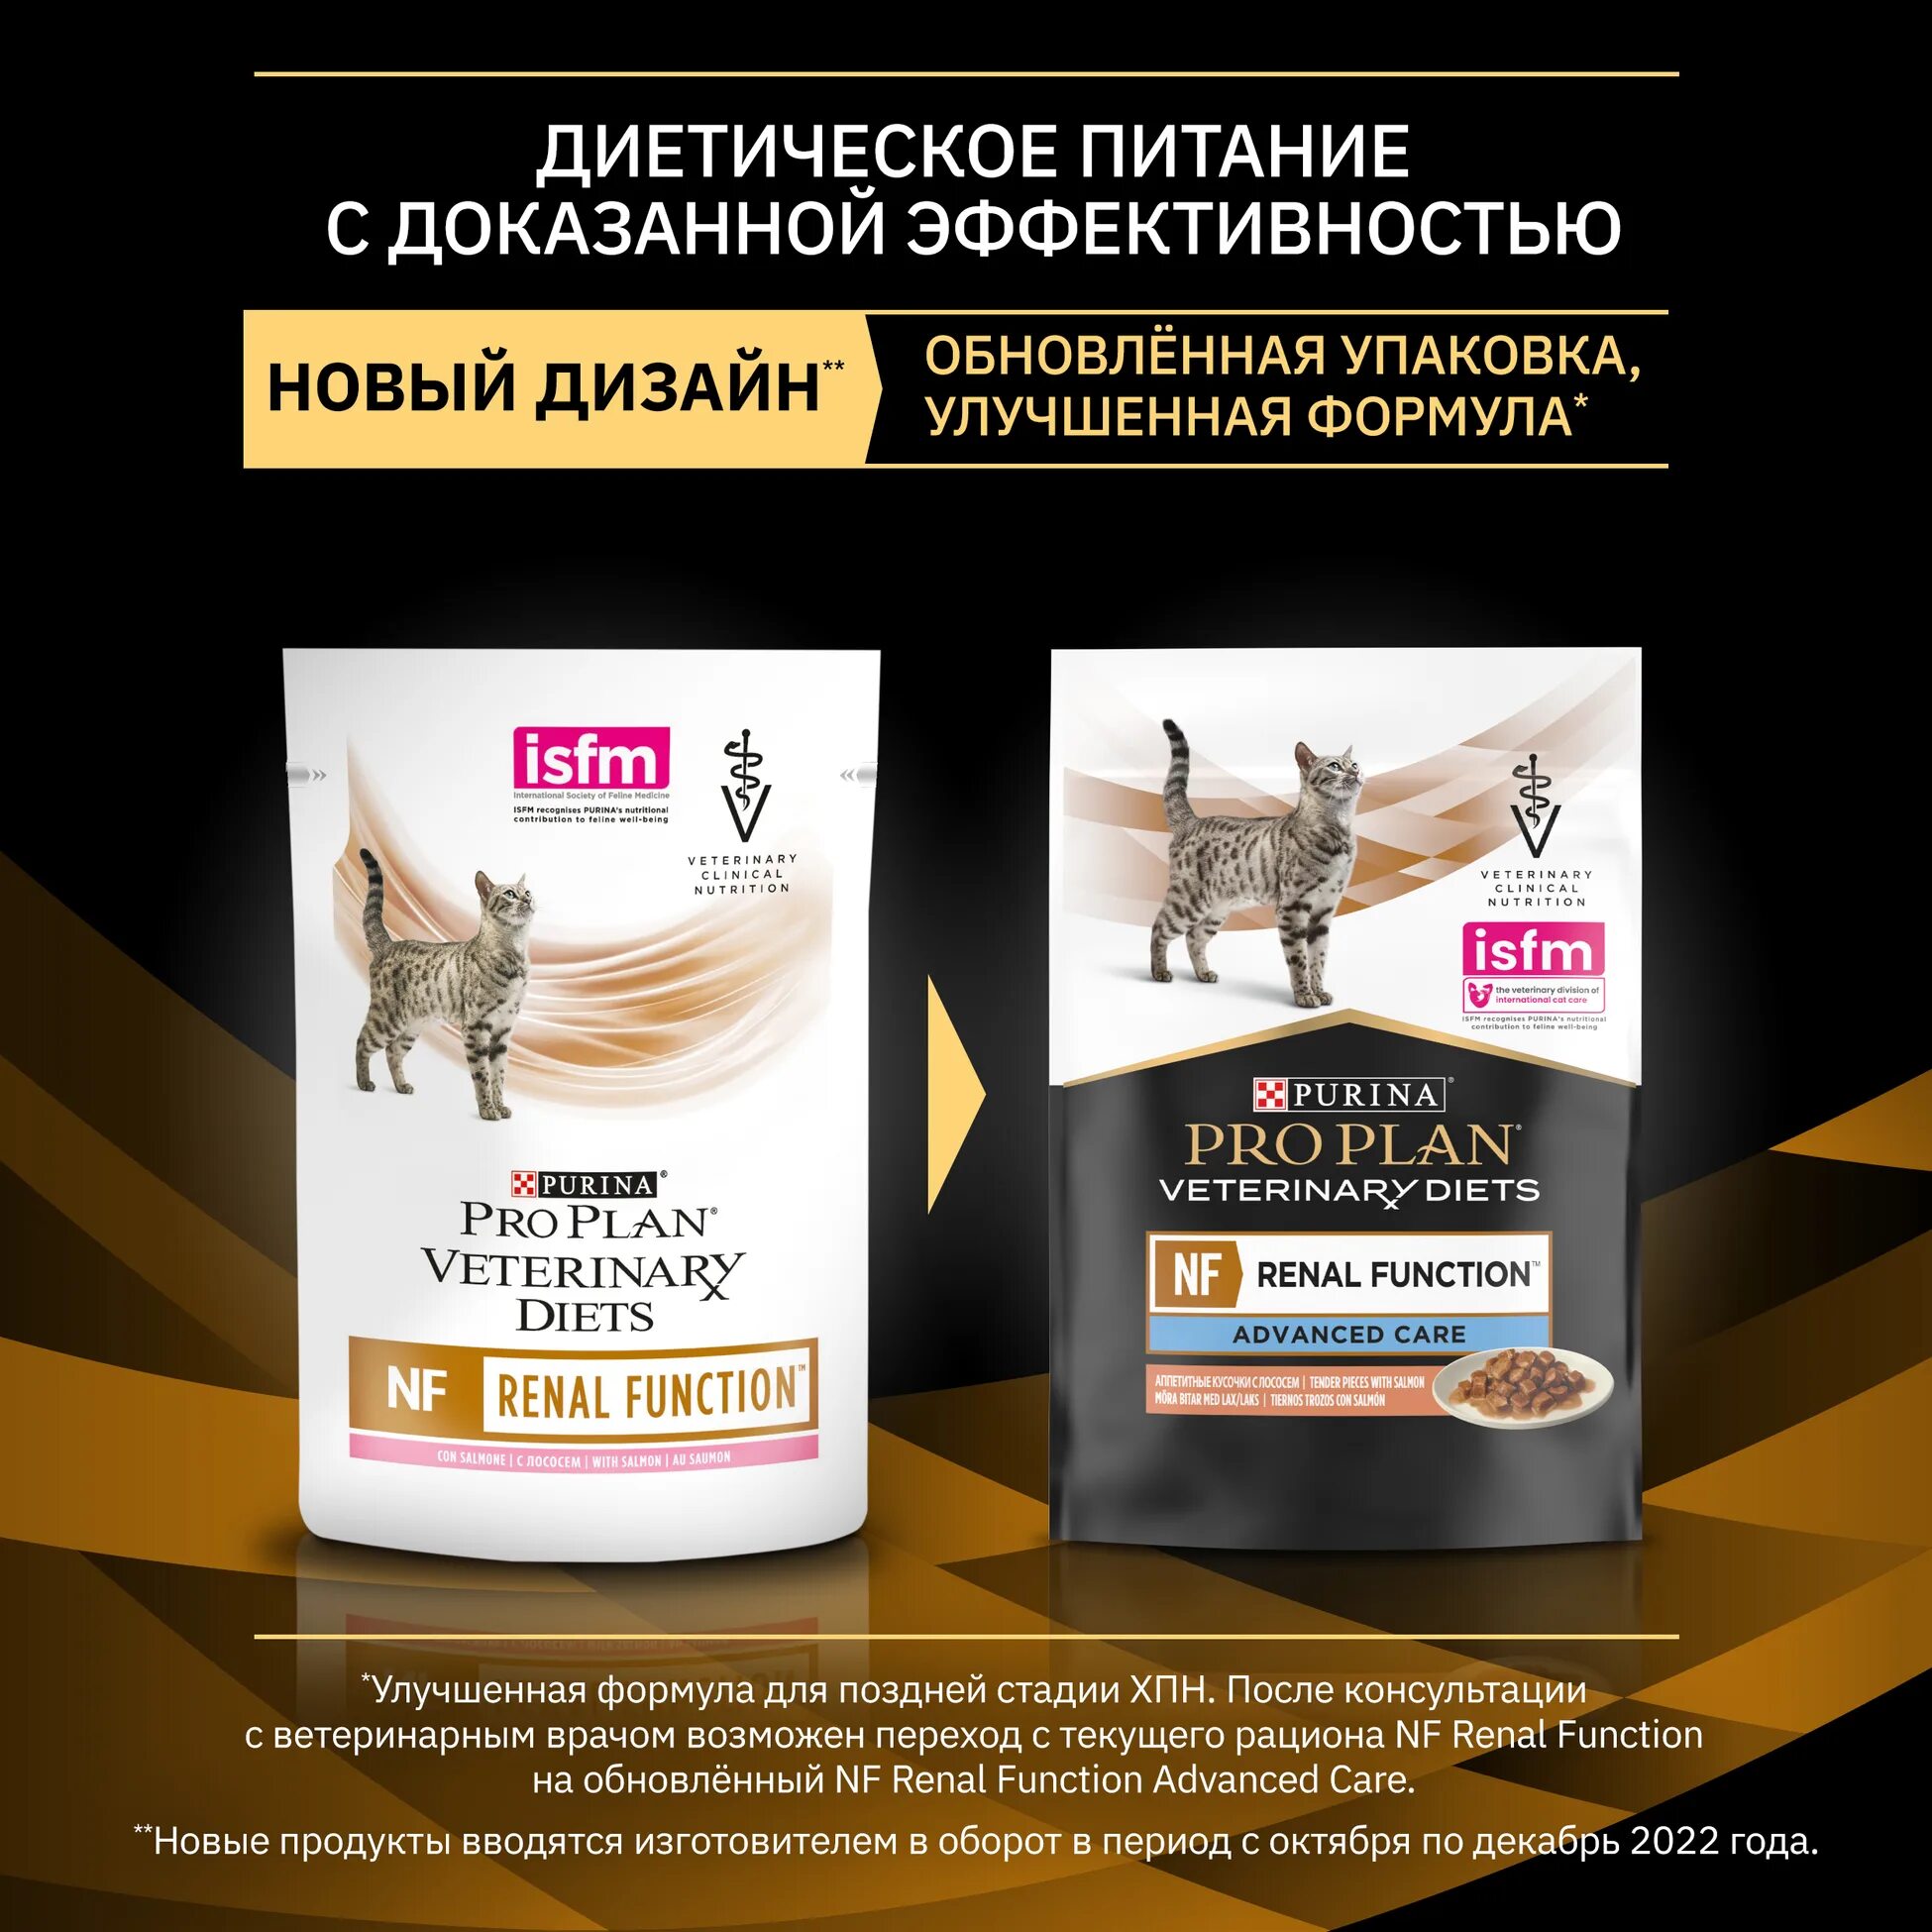 Pro Plan Veterinary Diets NF renal function. Pro Plan Veterinary Diets для кошек NF. Pro Plan Veterinary Diets renal function для кошек. Purina renal для кошек влажный. Корм nf renal function